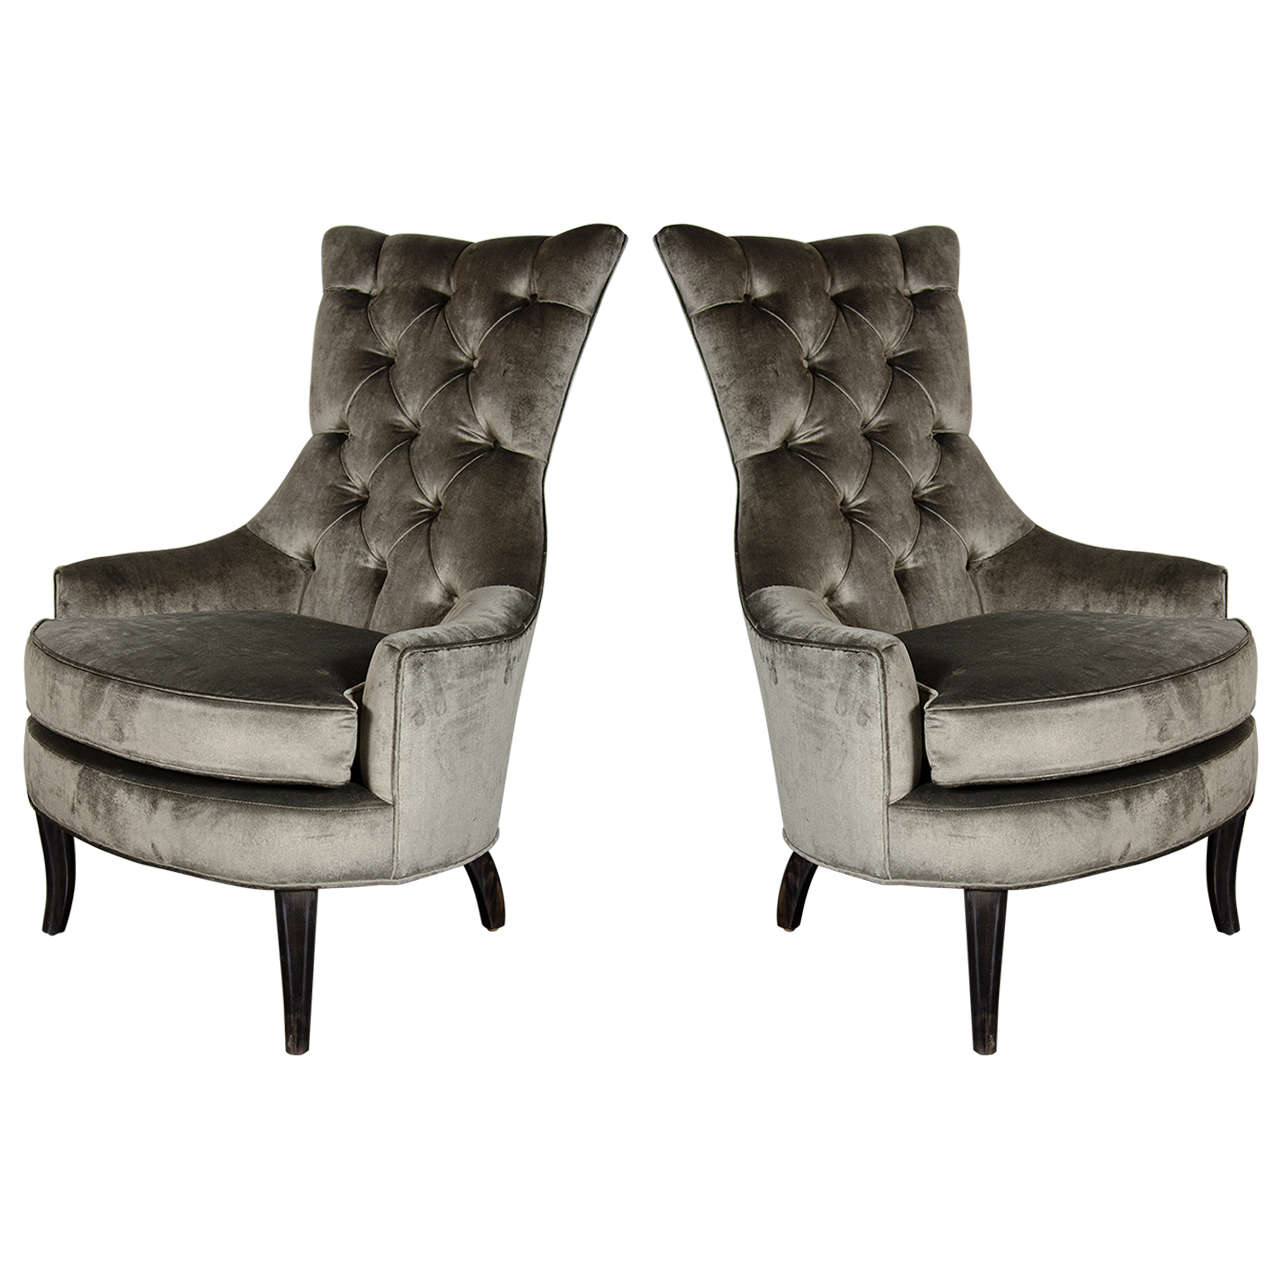  Pair of Mid-Century Modern Tufted High-Back Chairs in Smoked Platinum Velvet